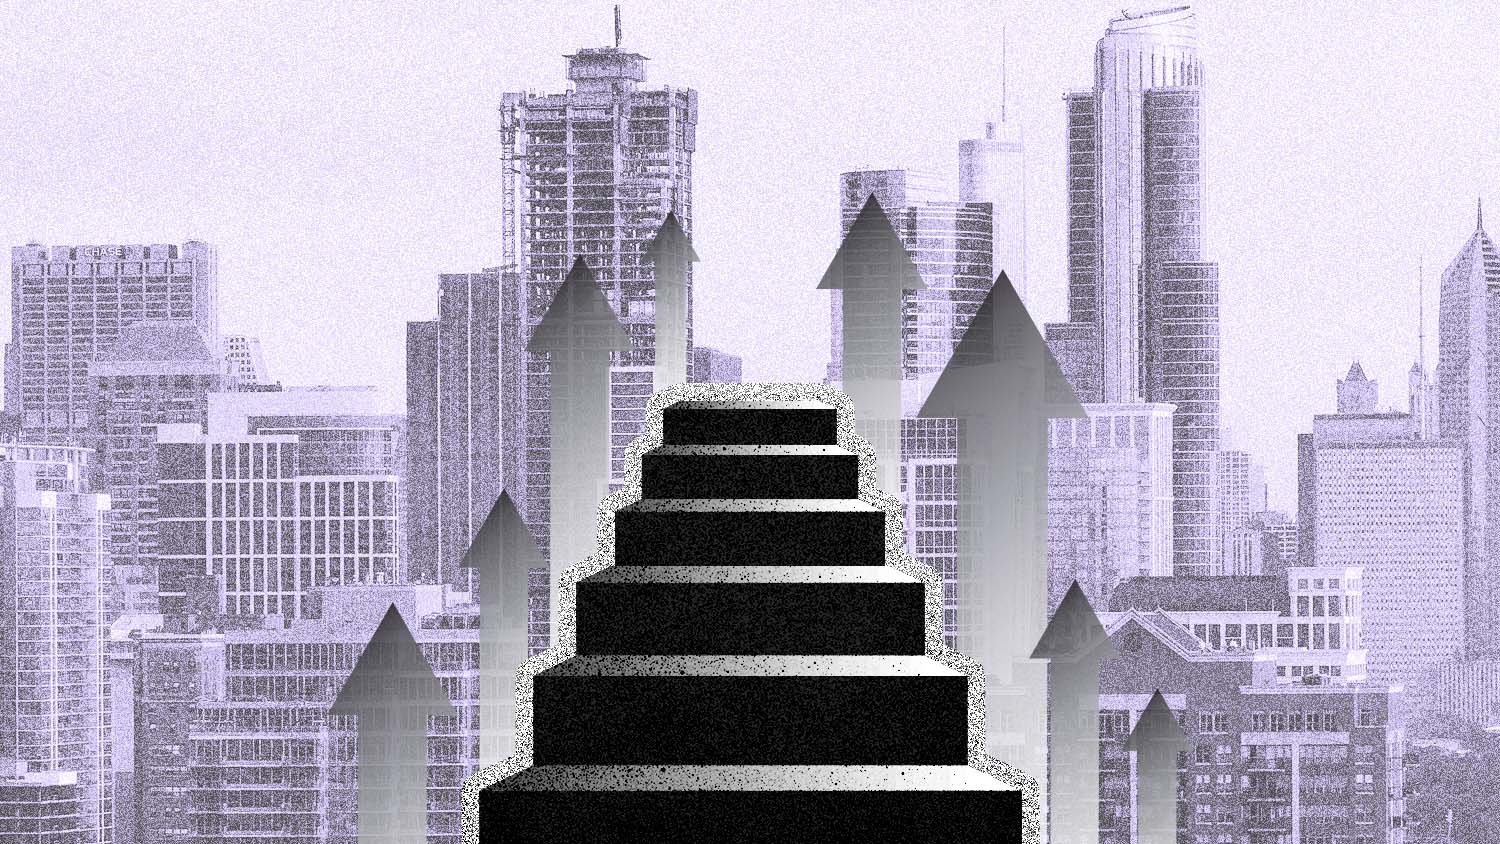 Stairs over a city scape